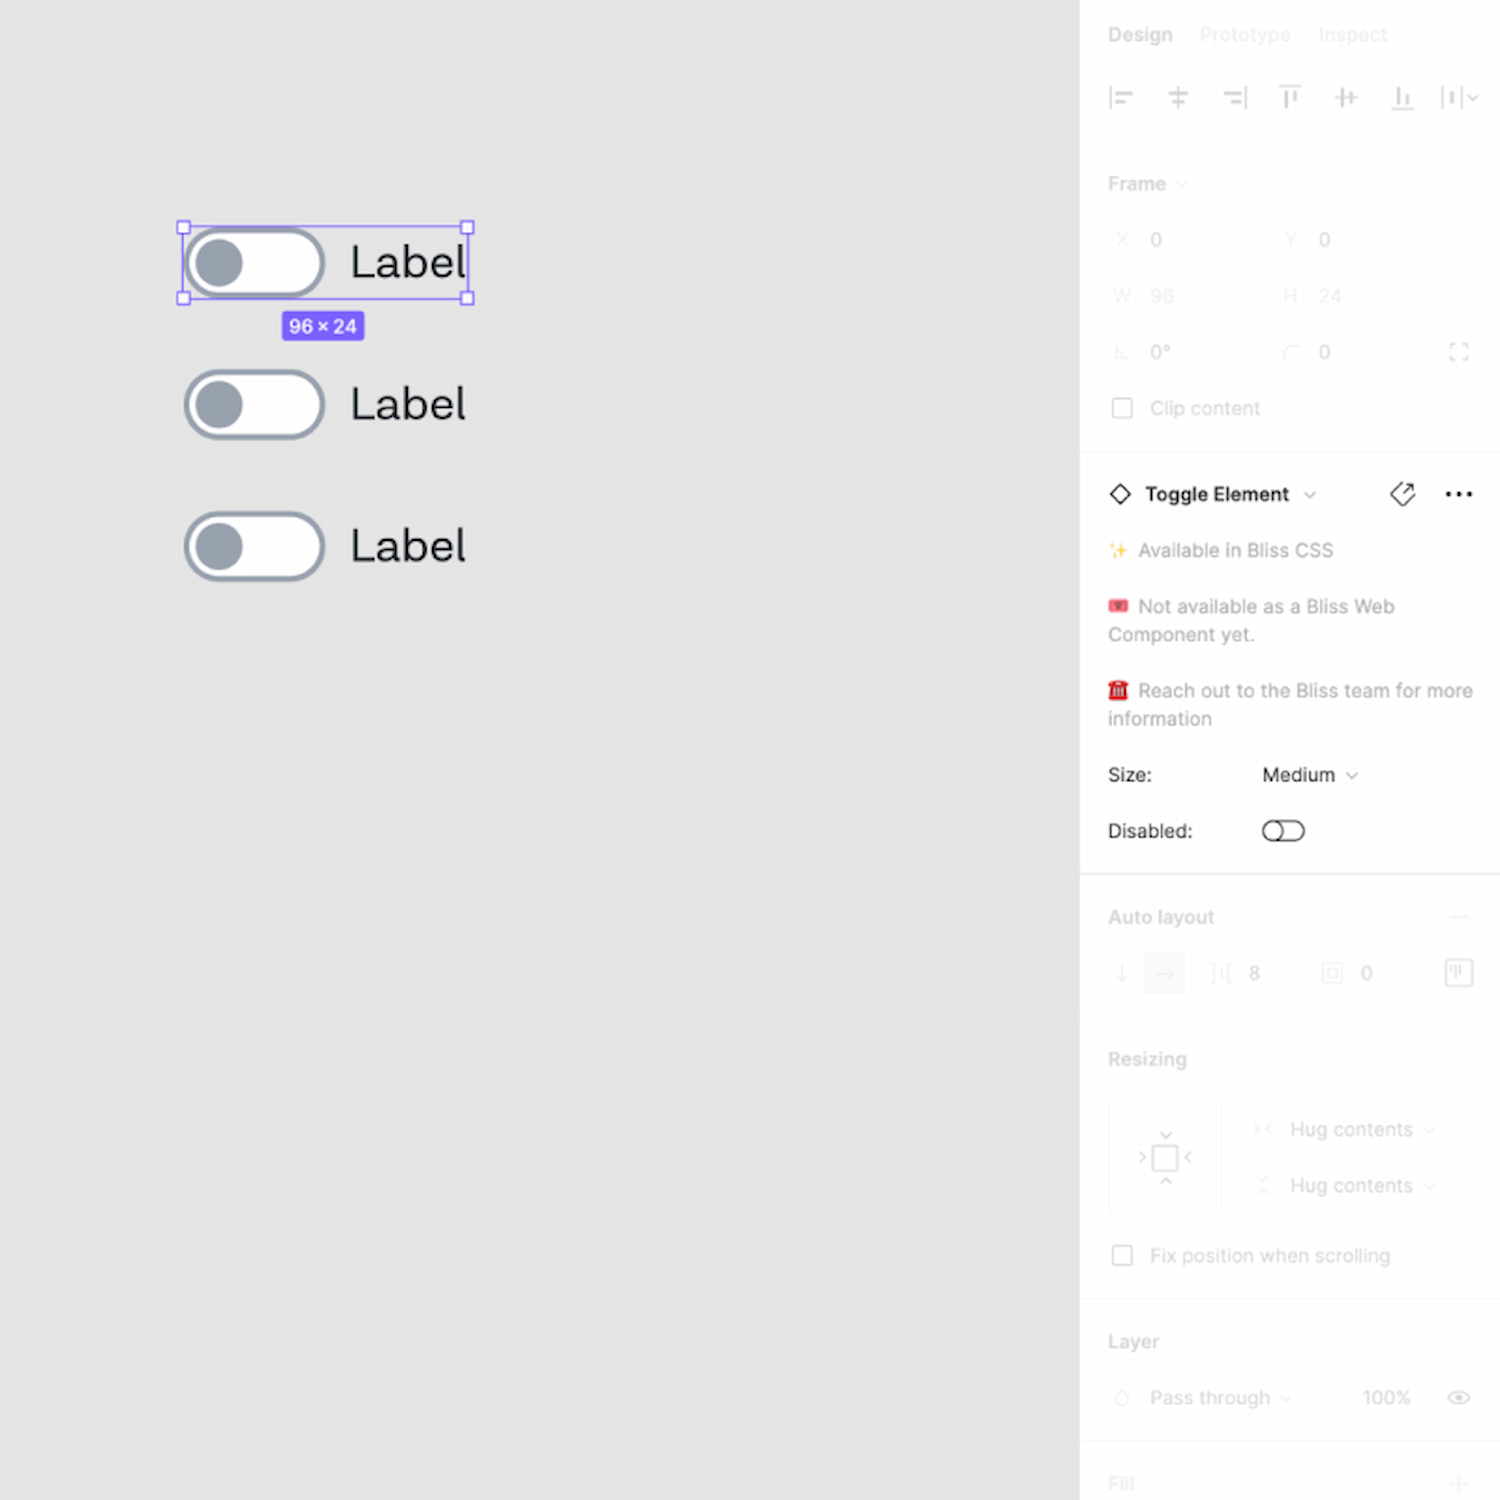 Screenshot from Figma showing three toggle components with the variant sidebar and additional information.